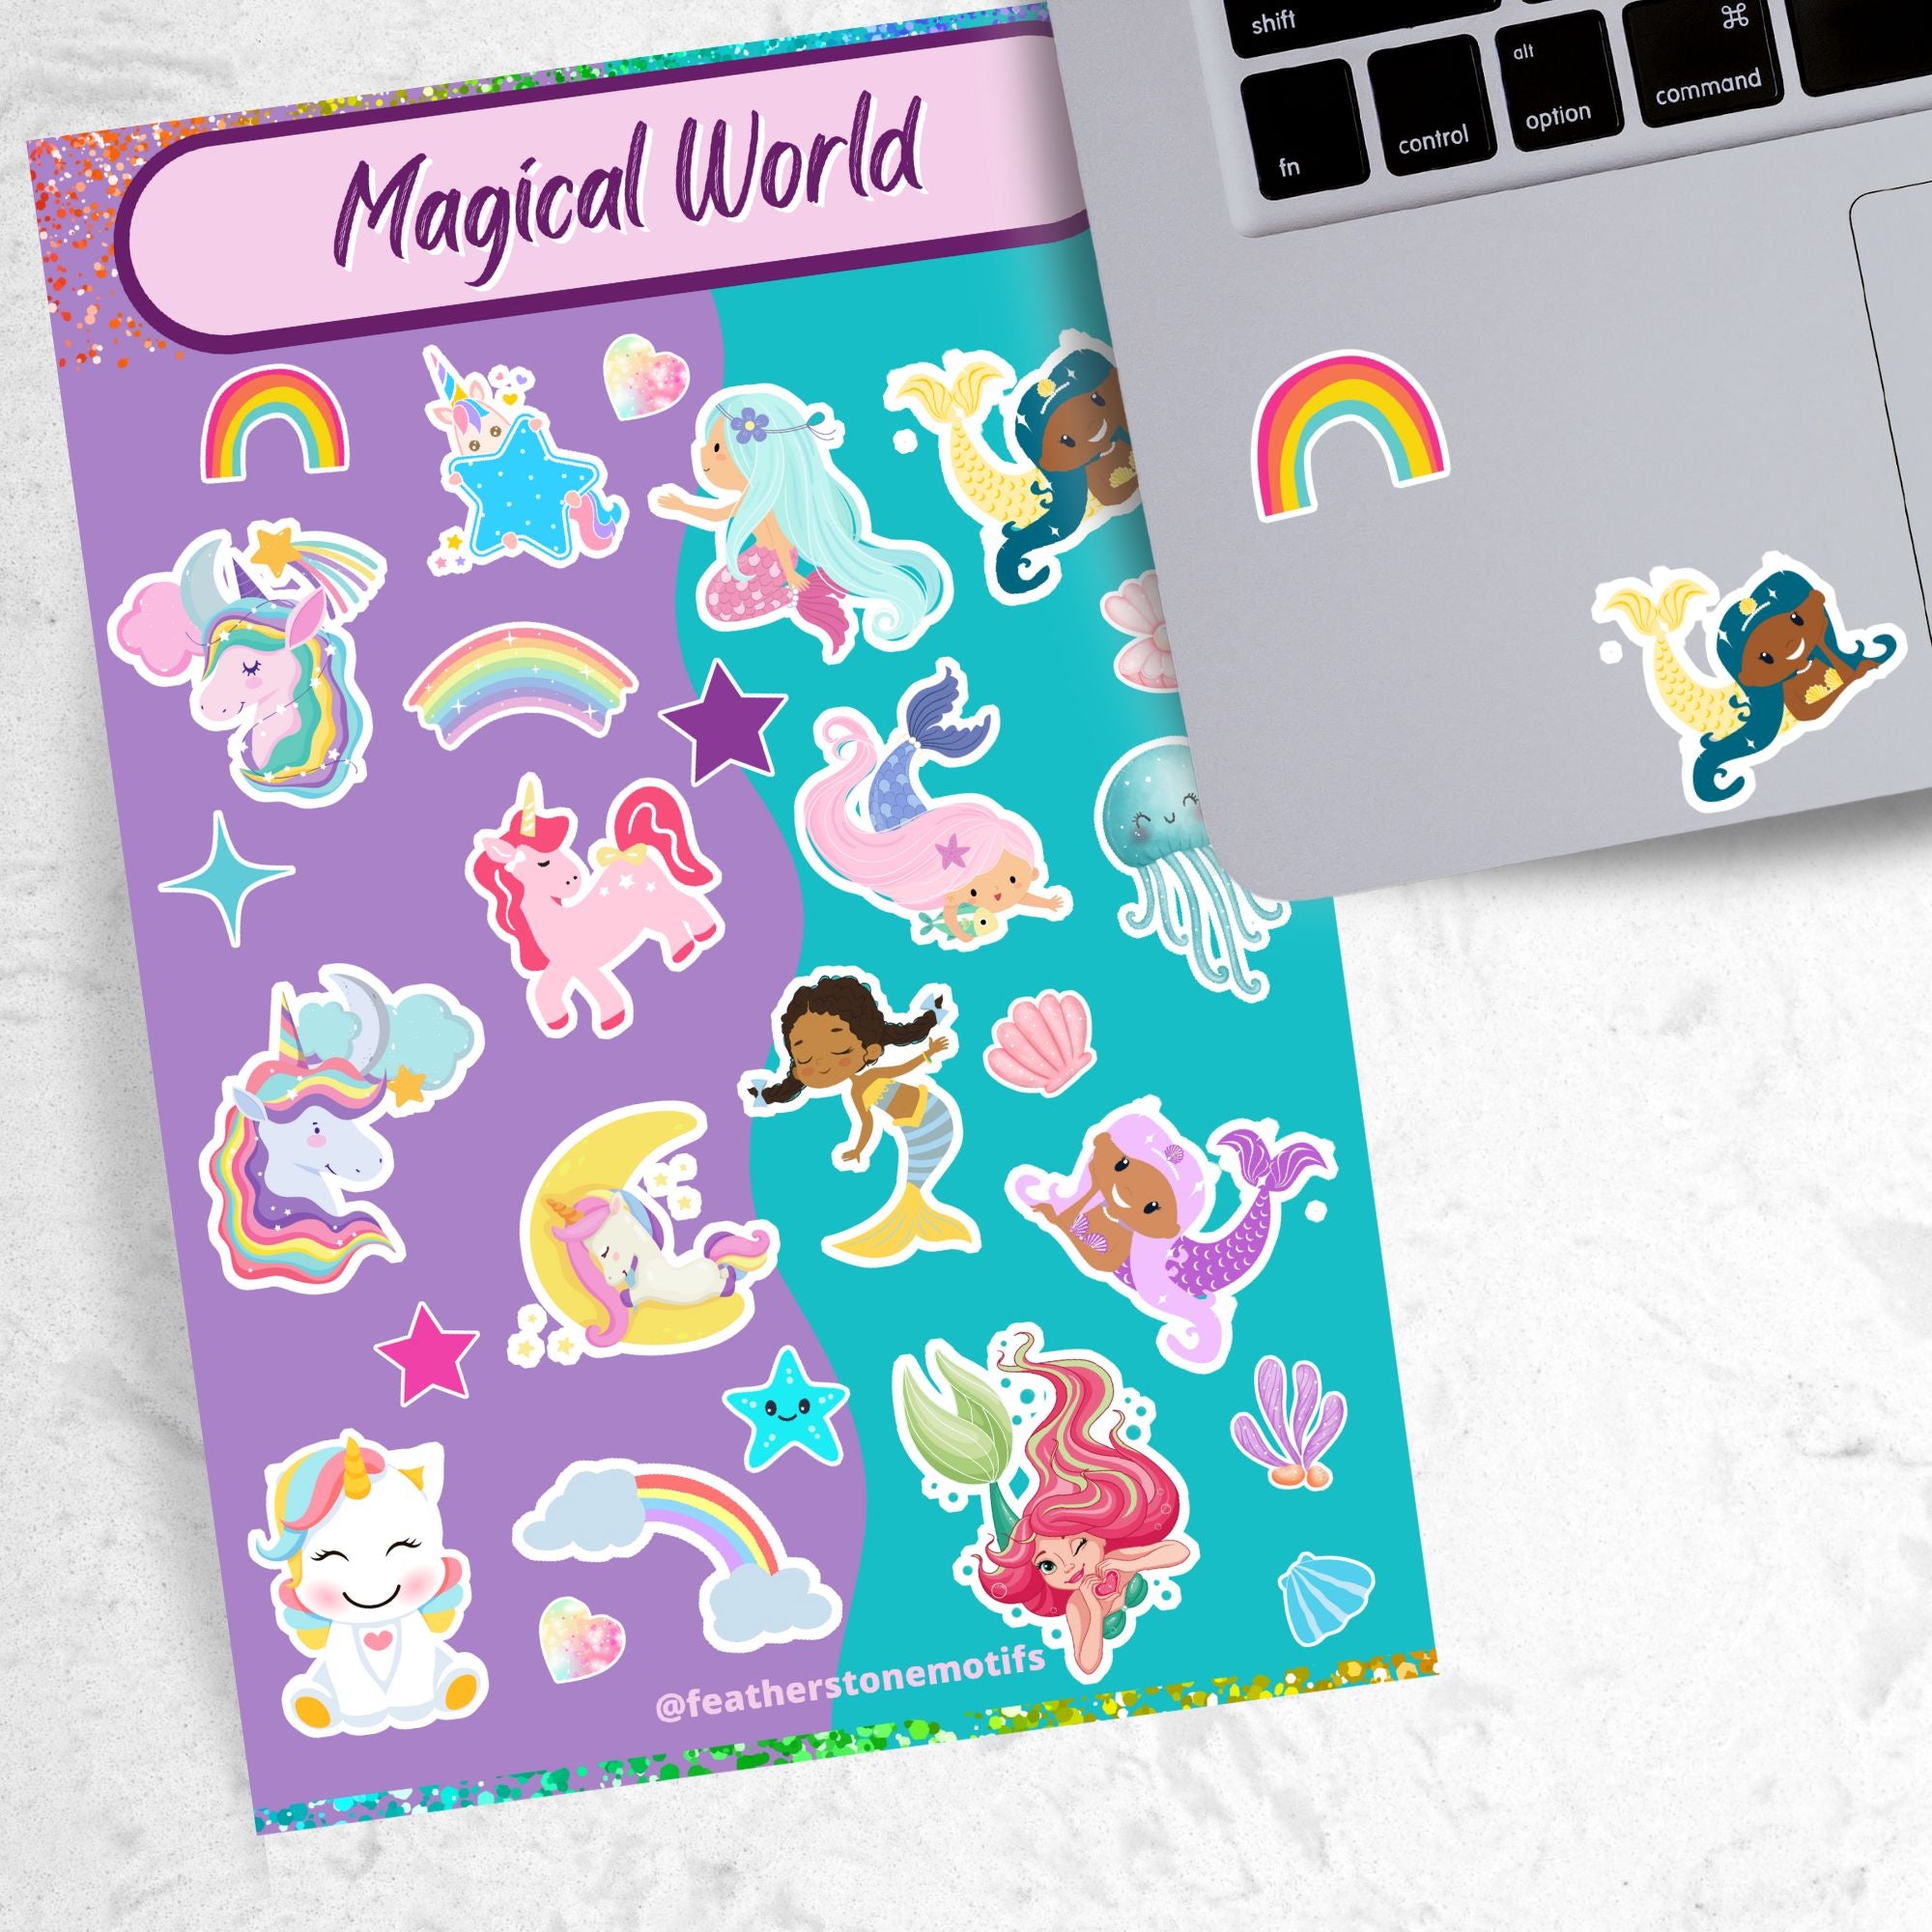 Mermaids, rainbows, and unicorns; it's our Magical World sparkle sticker sheet! This sticker sheet is filled with fun and cute magical images, and it has a sparkle overlay so it glitters in the light! This image is of the sparkle sticker sheet next to an open laptop with rainbow and mermaid stickers applied below the keyboard.